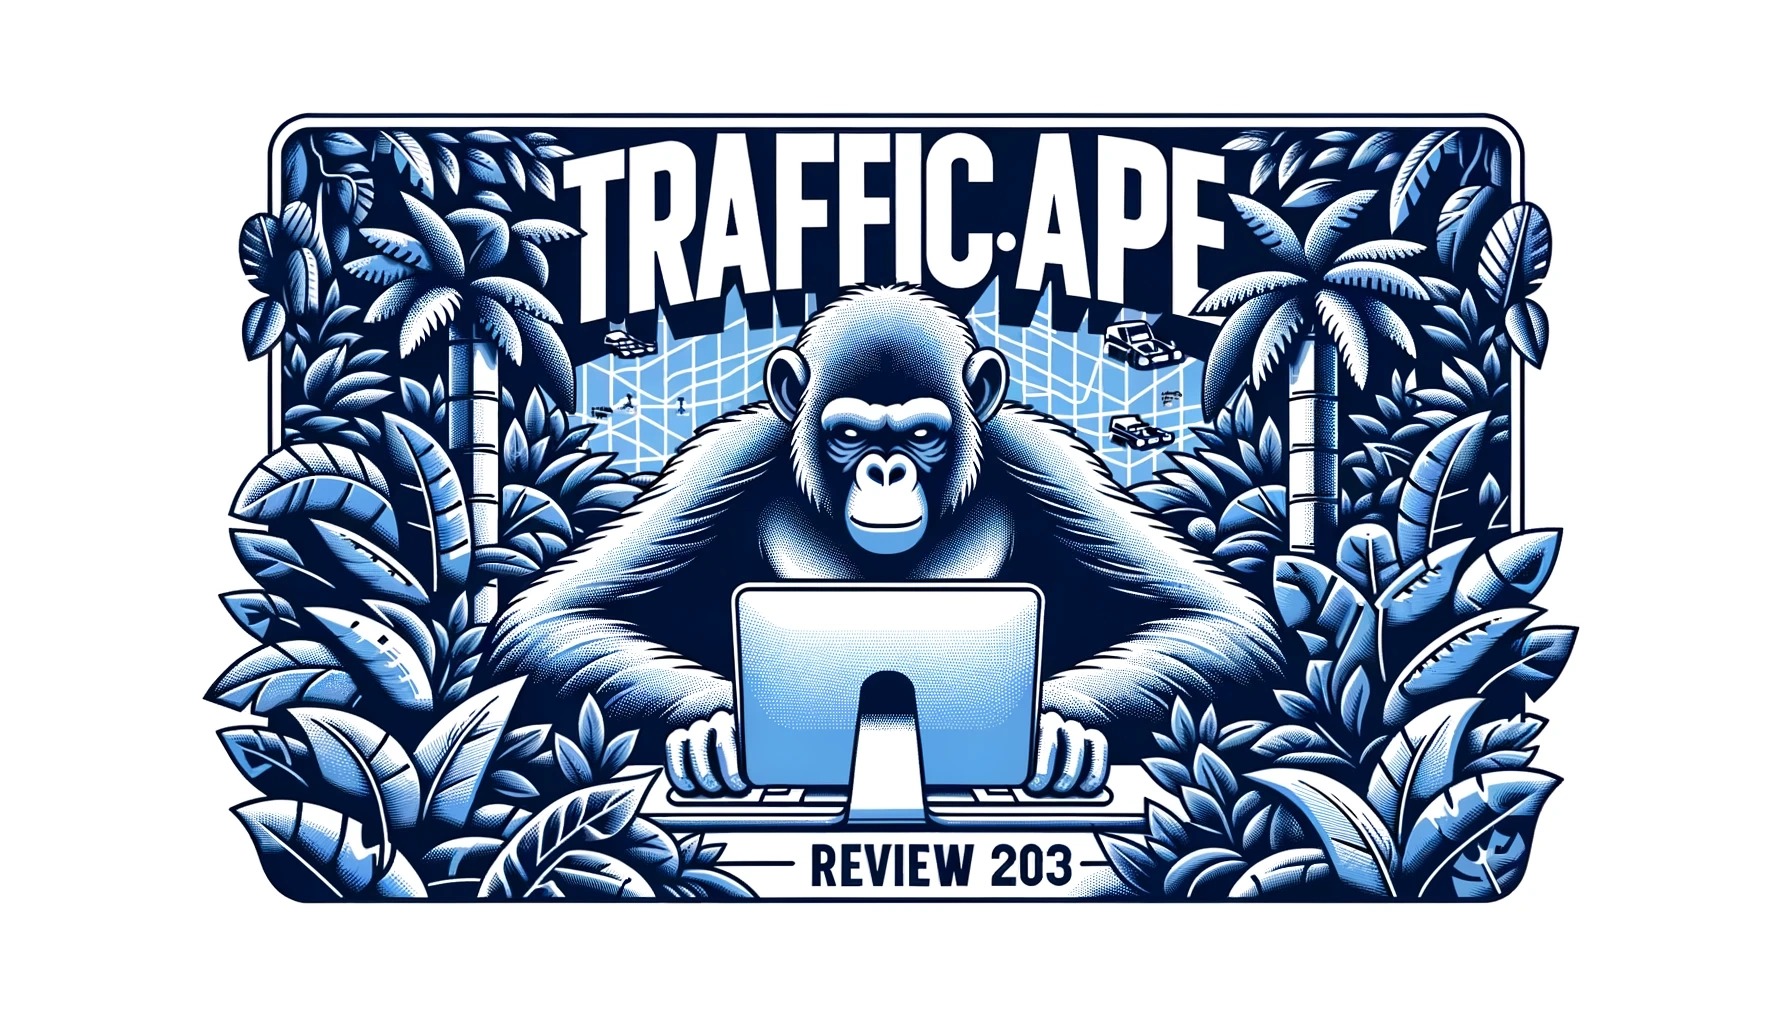 TrafficApe Review Article illustration